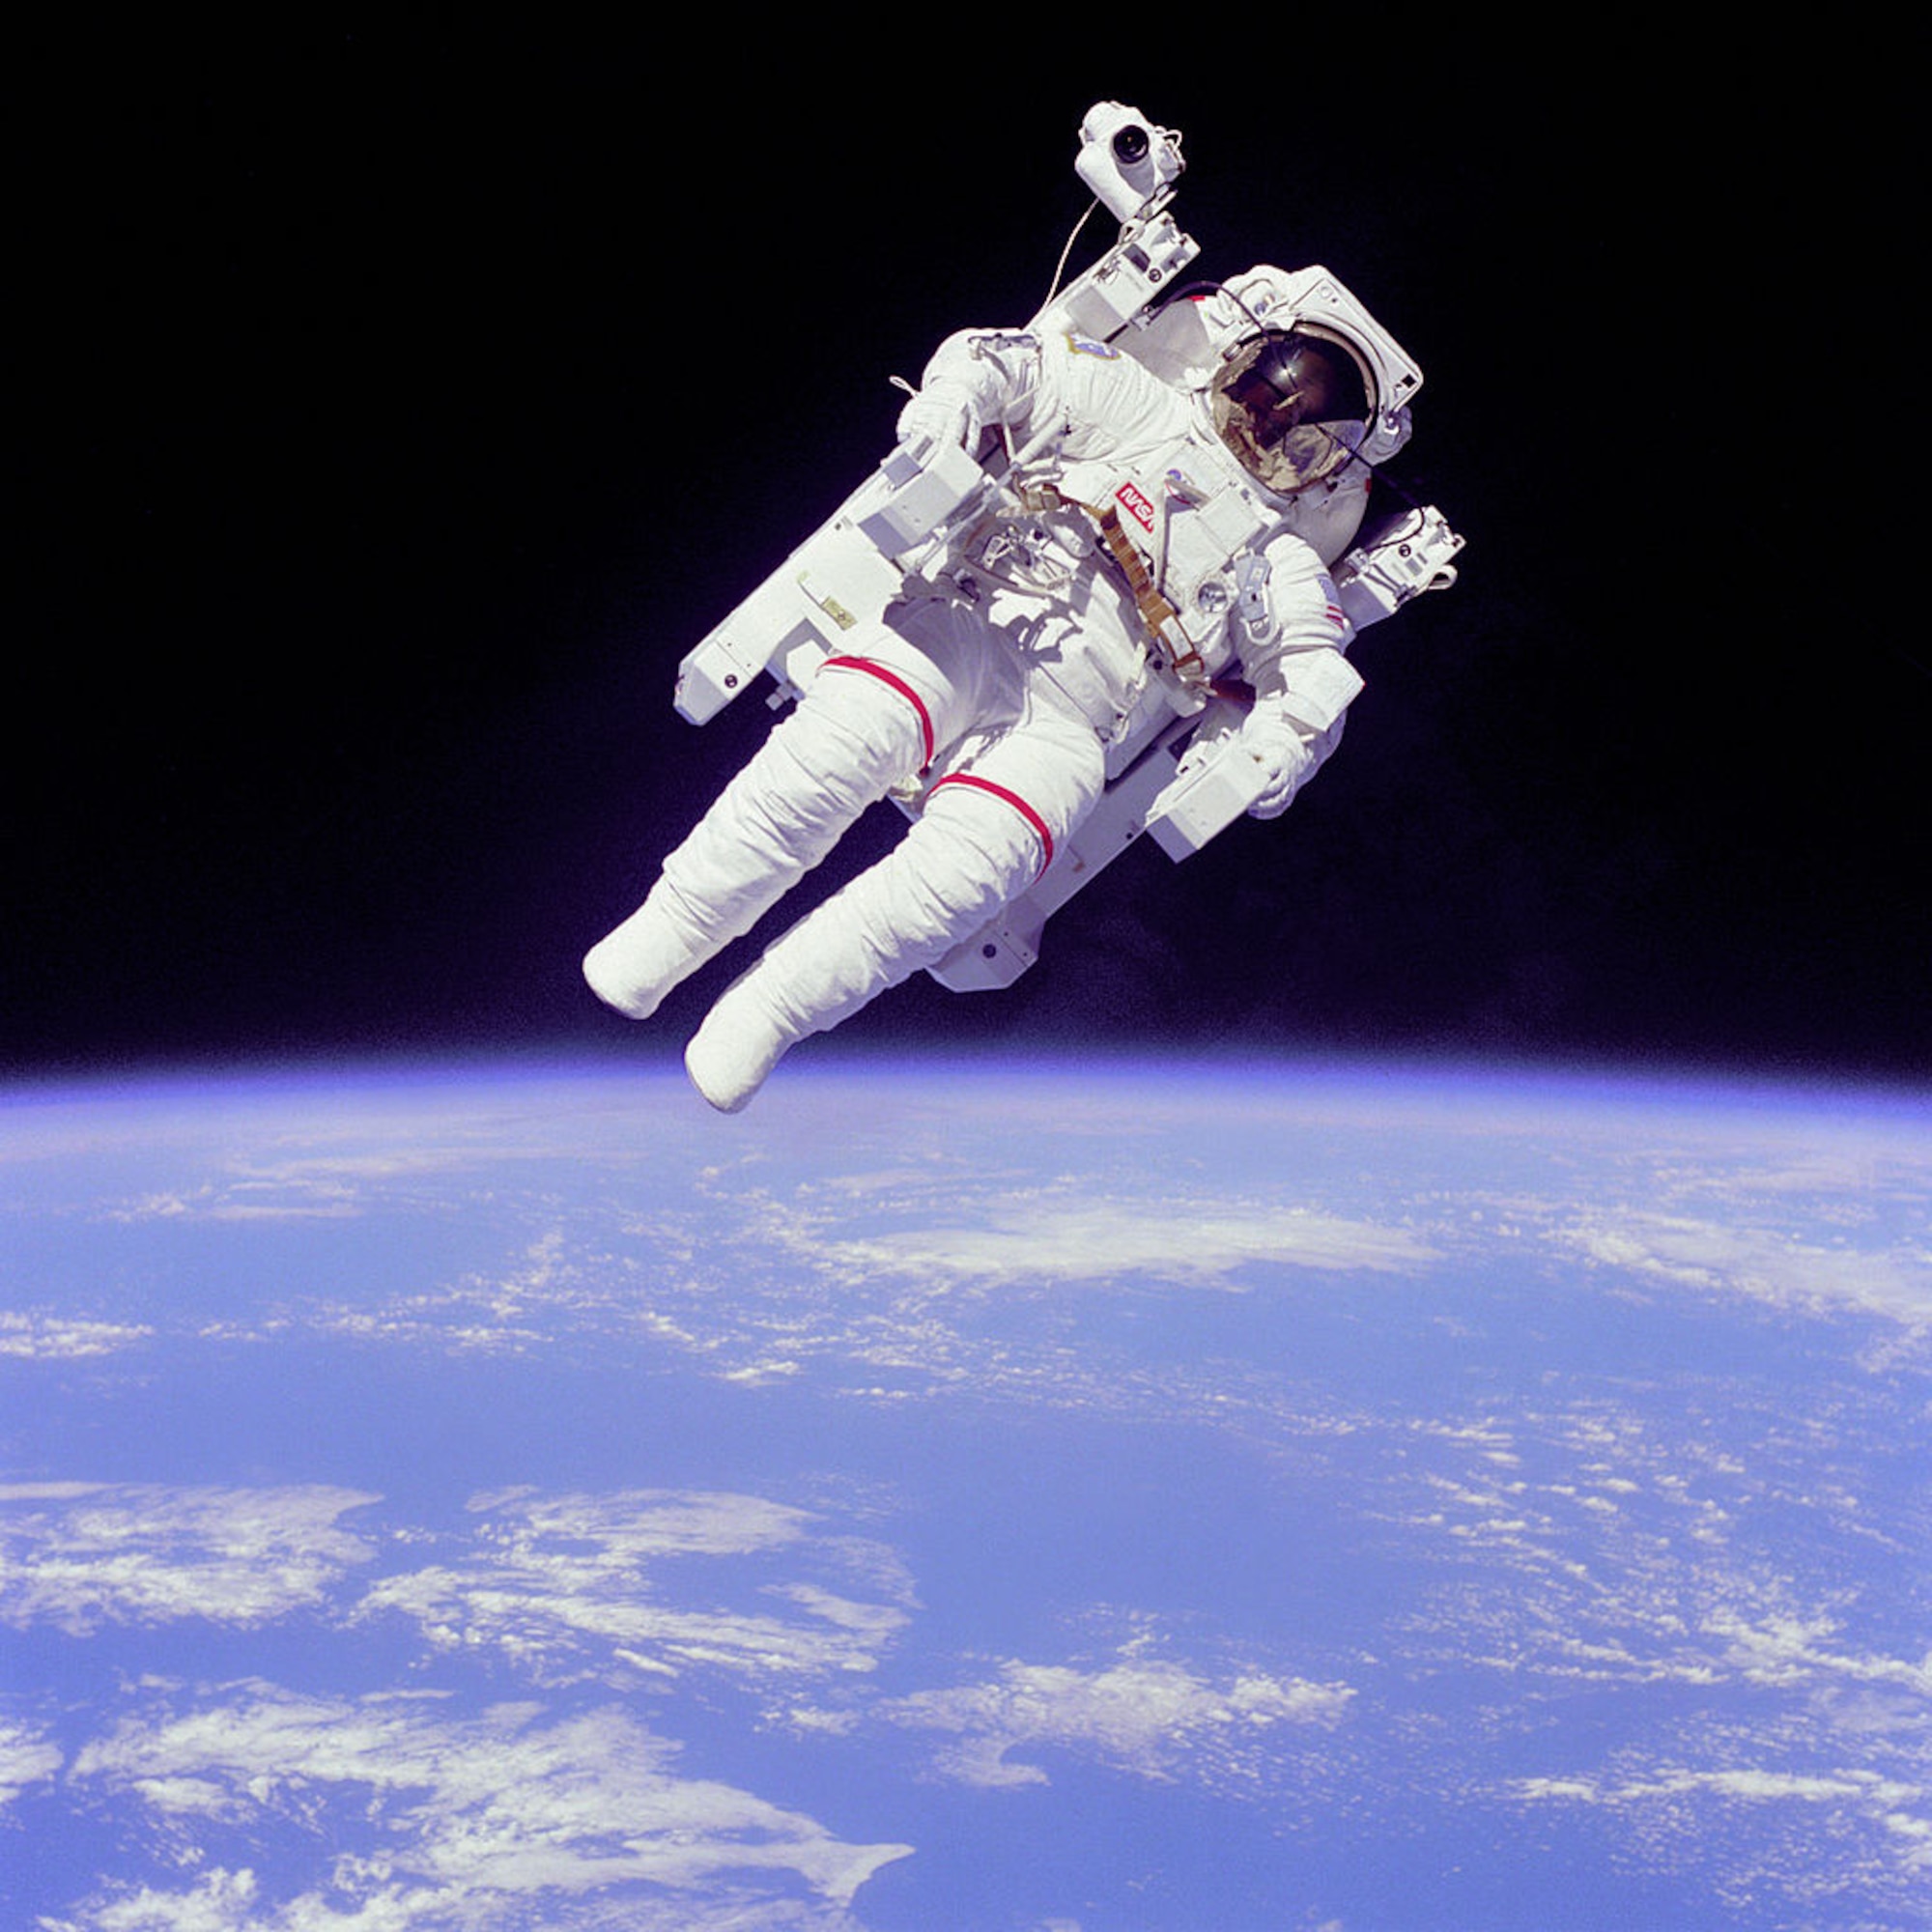 NASA Astronaut Bruce McCandless became the first person to make an untethered spacewalk during STS-41-B in 1984. (NASA photo)